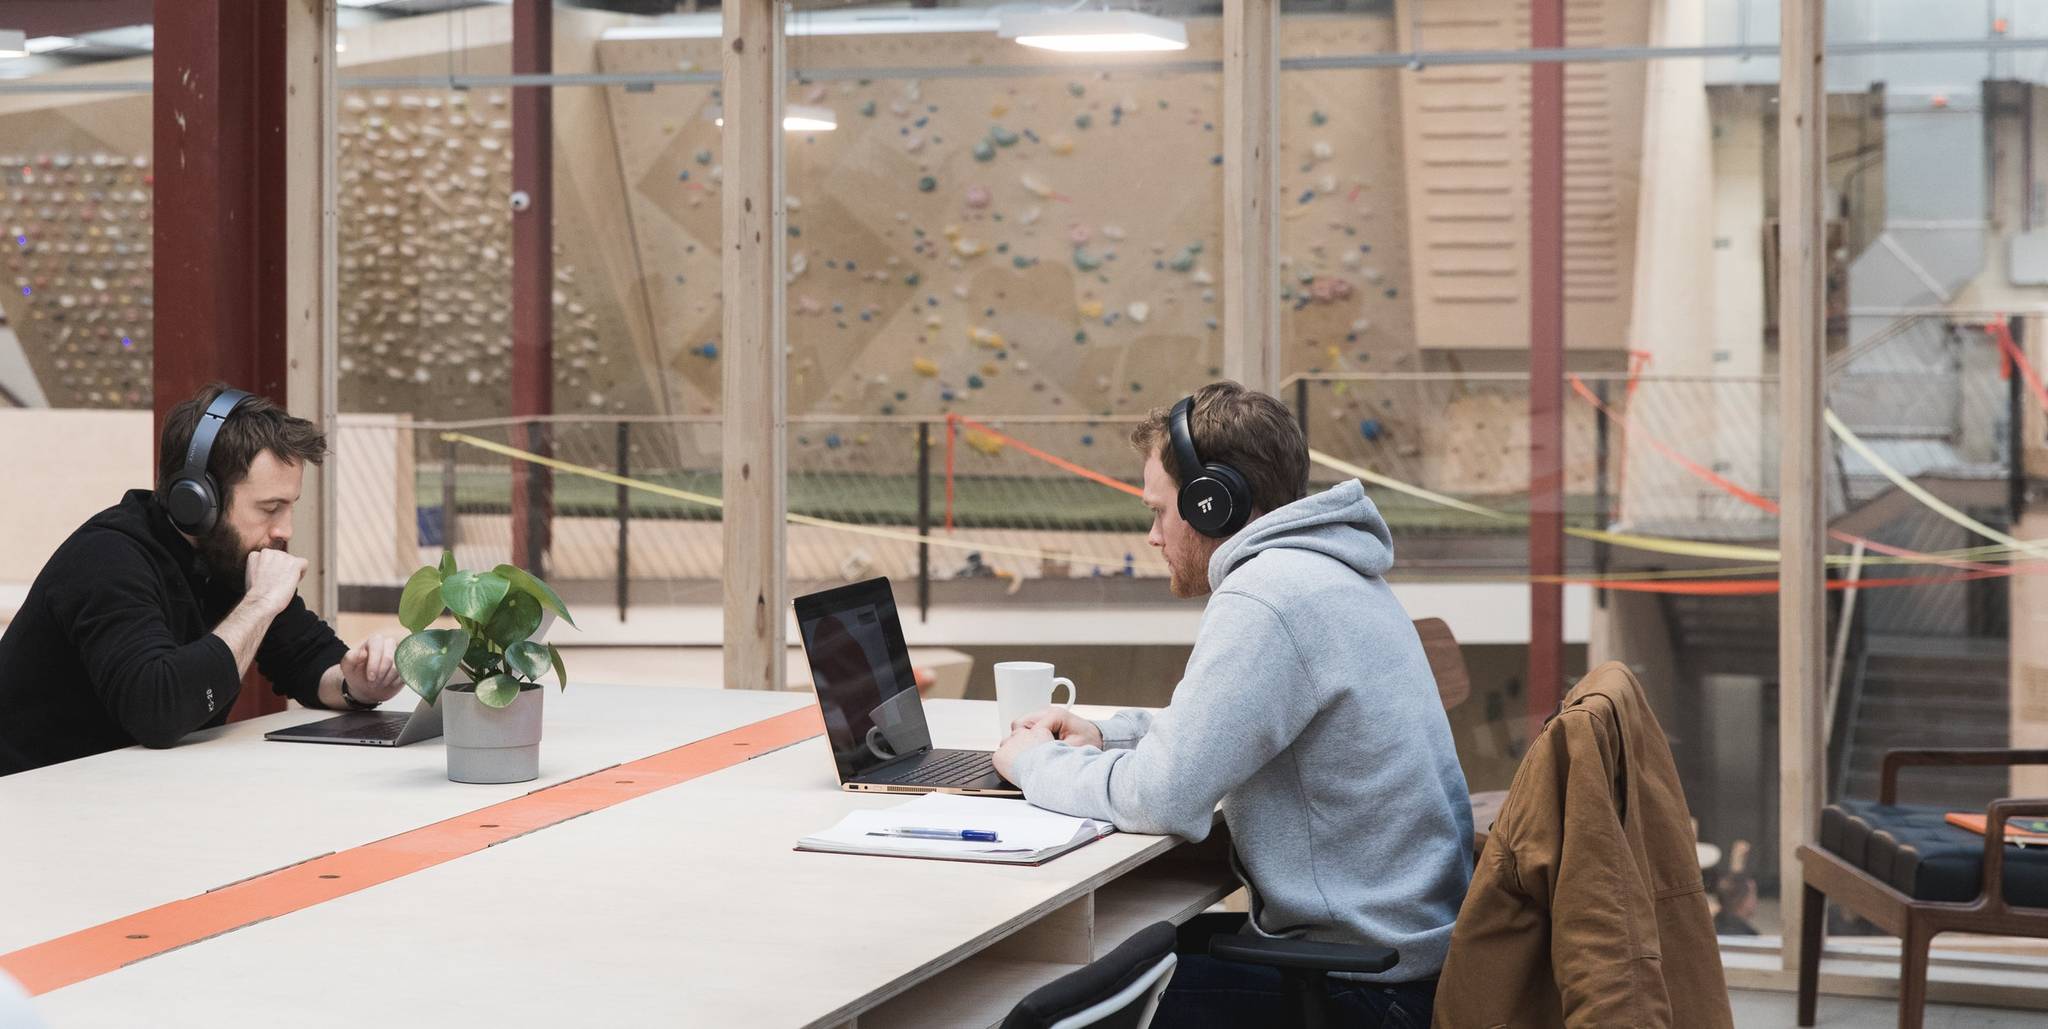 Yonder: a fitness-focused coworking community